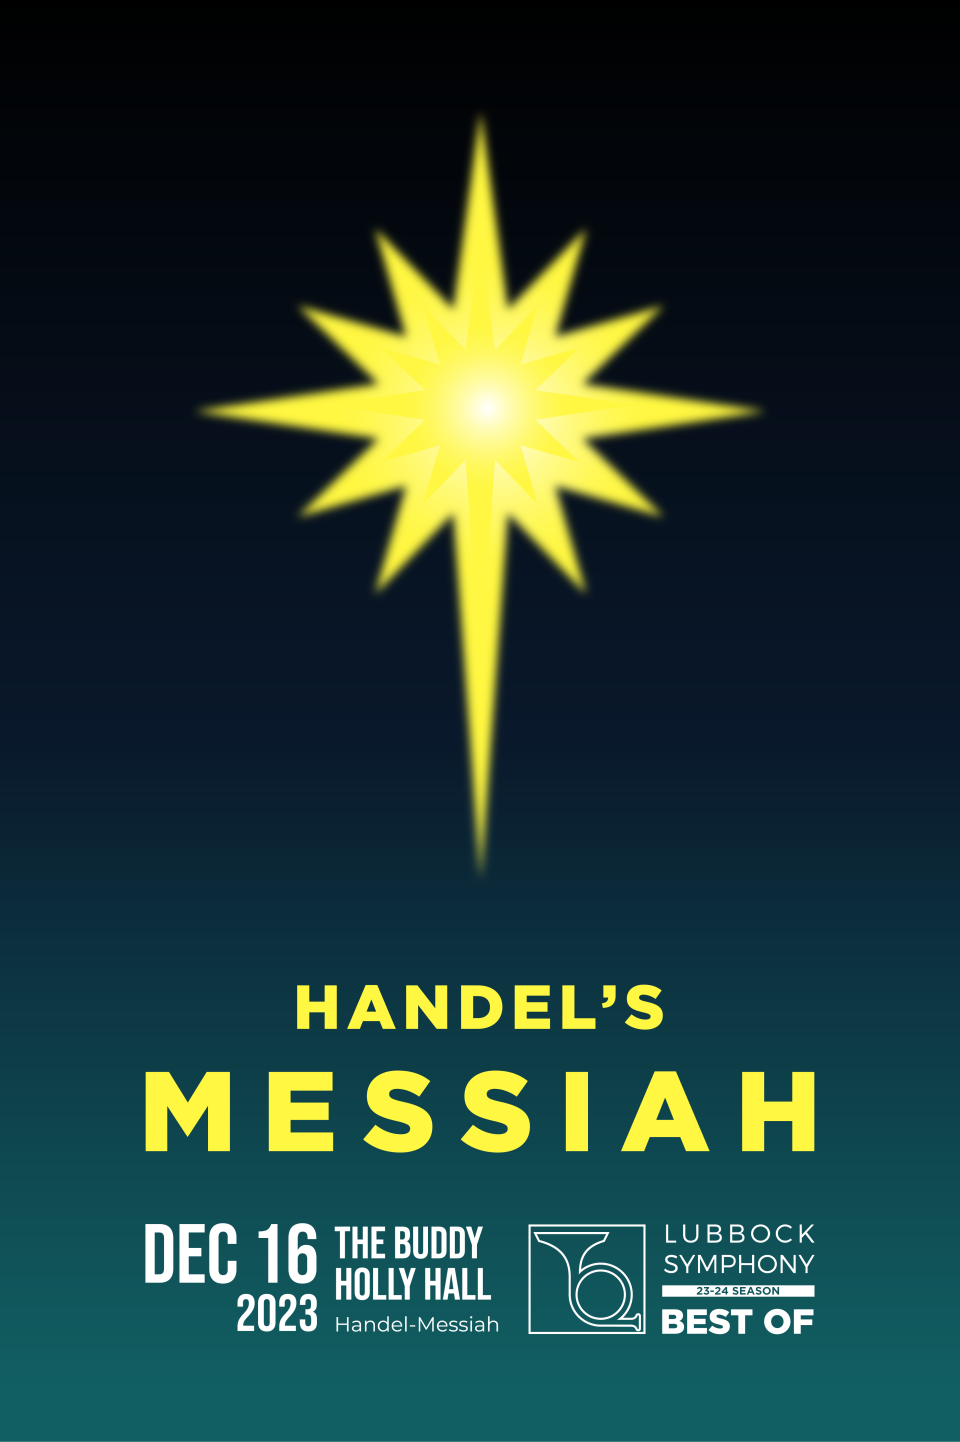 “Handel’s Messiah,” performed by the Lubbock Chamber Orchestra, premieres Saturday, Dec. 16 at 7:30 p.m. at The Buddy Holly
Hall of Performing Arts and Sciences.